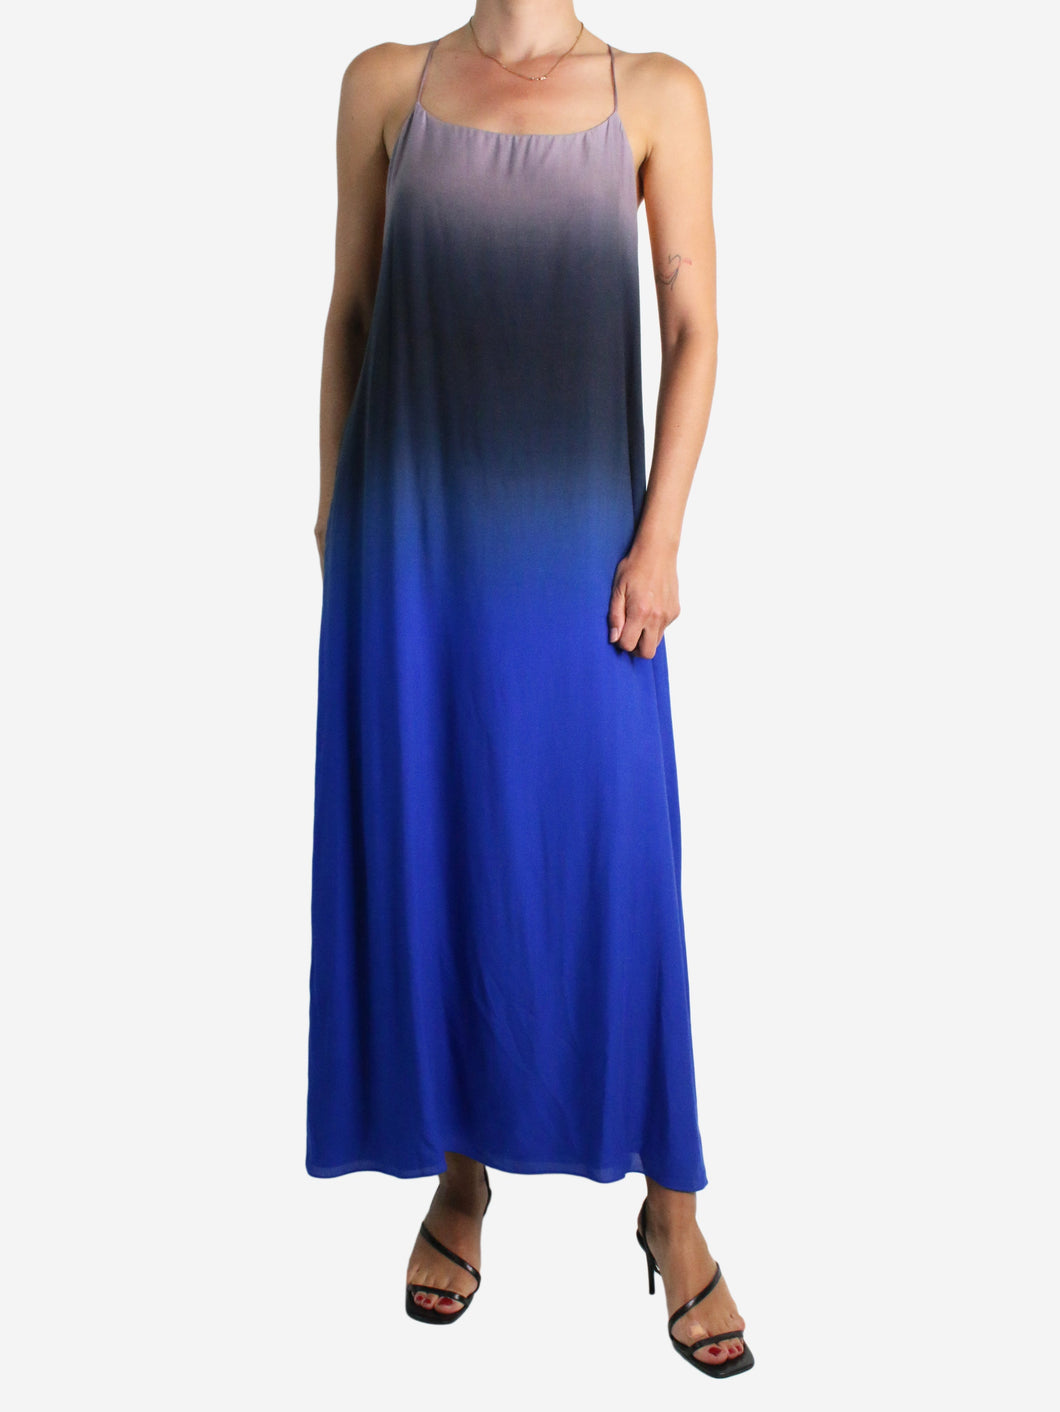 Blue strapless ombre maxi dress - size UK 10 Dresses The Row 